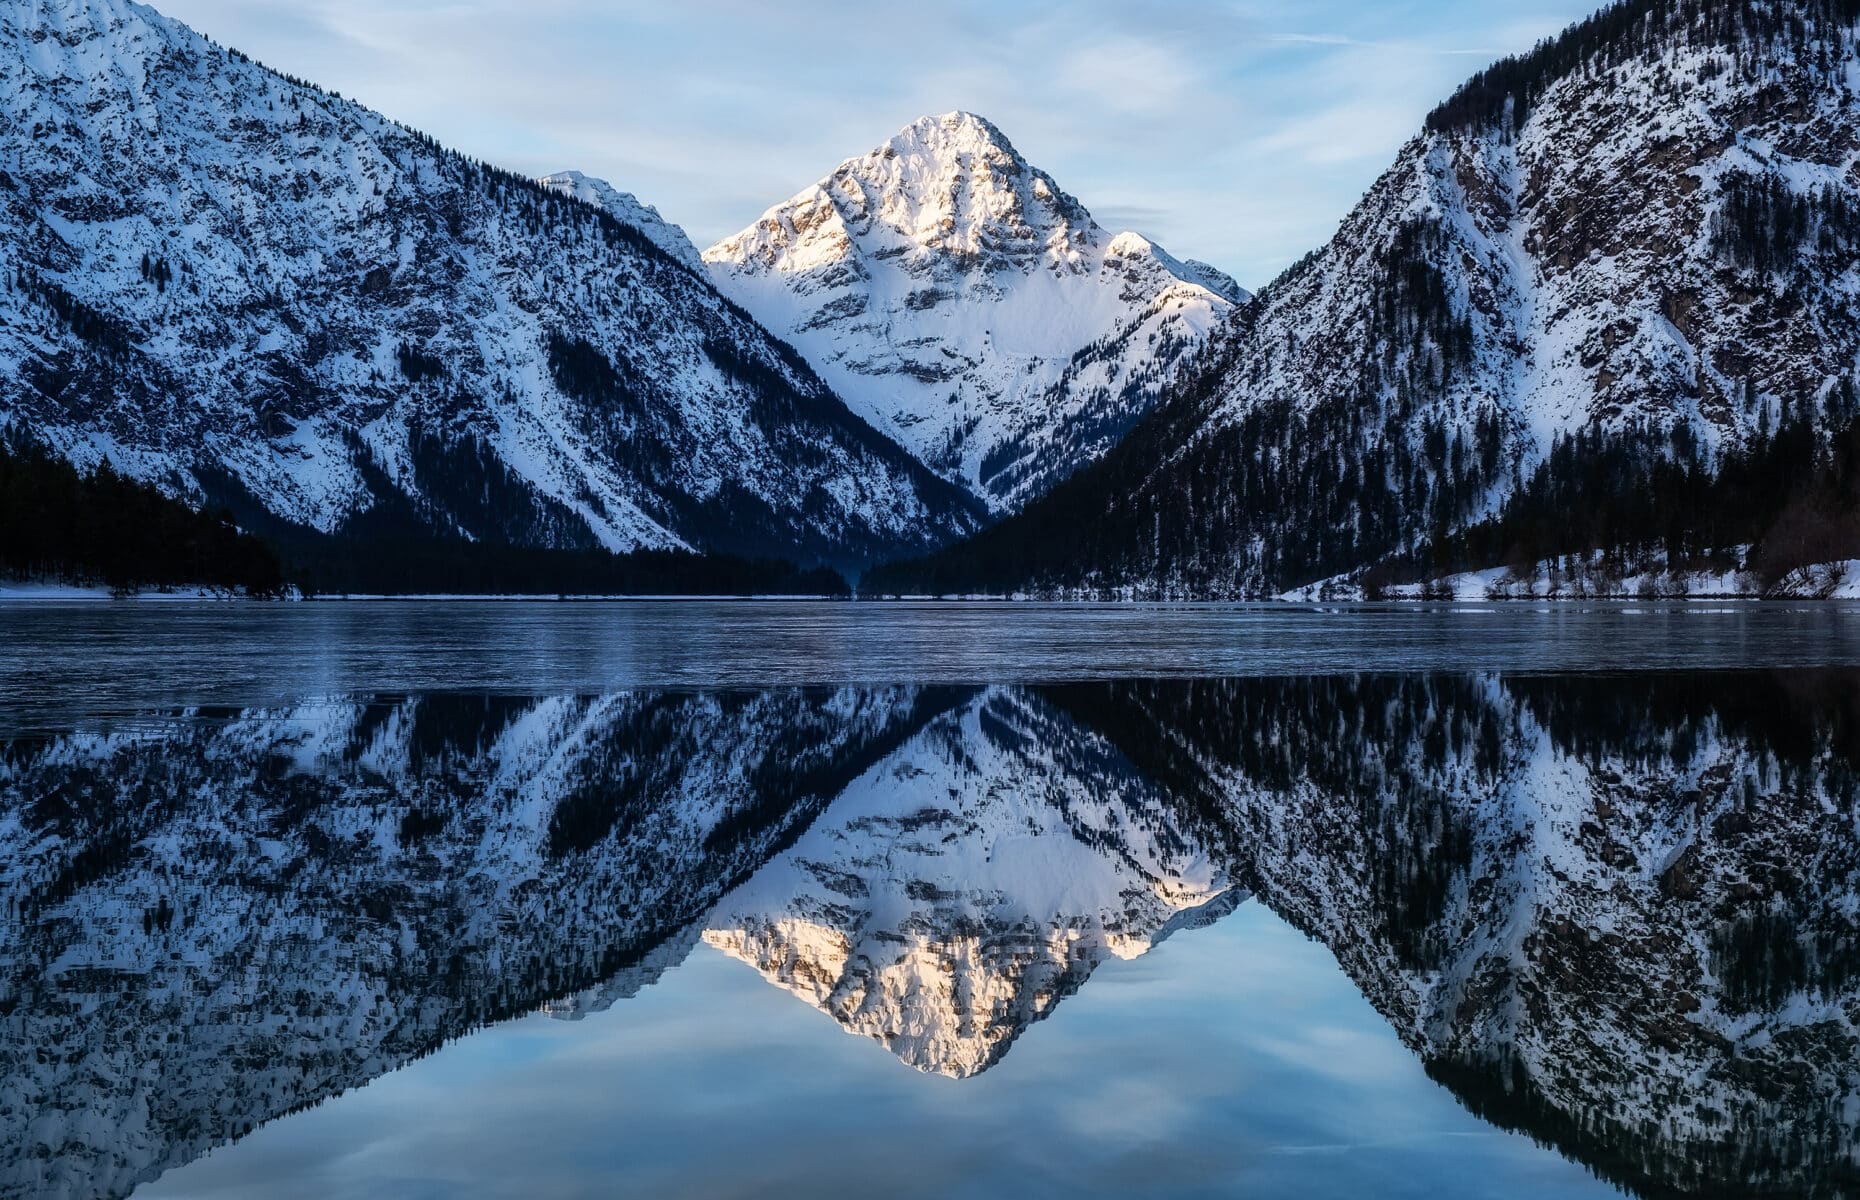 Landscape in Austria. Mountains and reflections in the lake. Winter season.